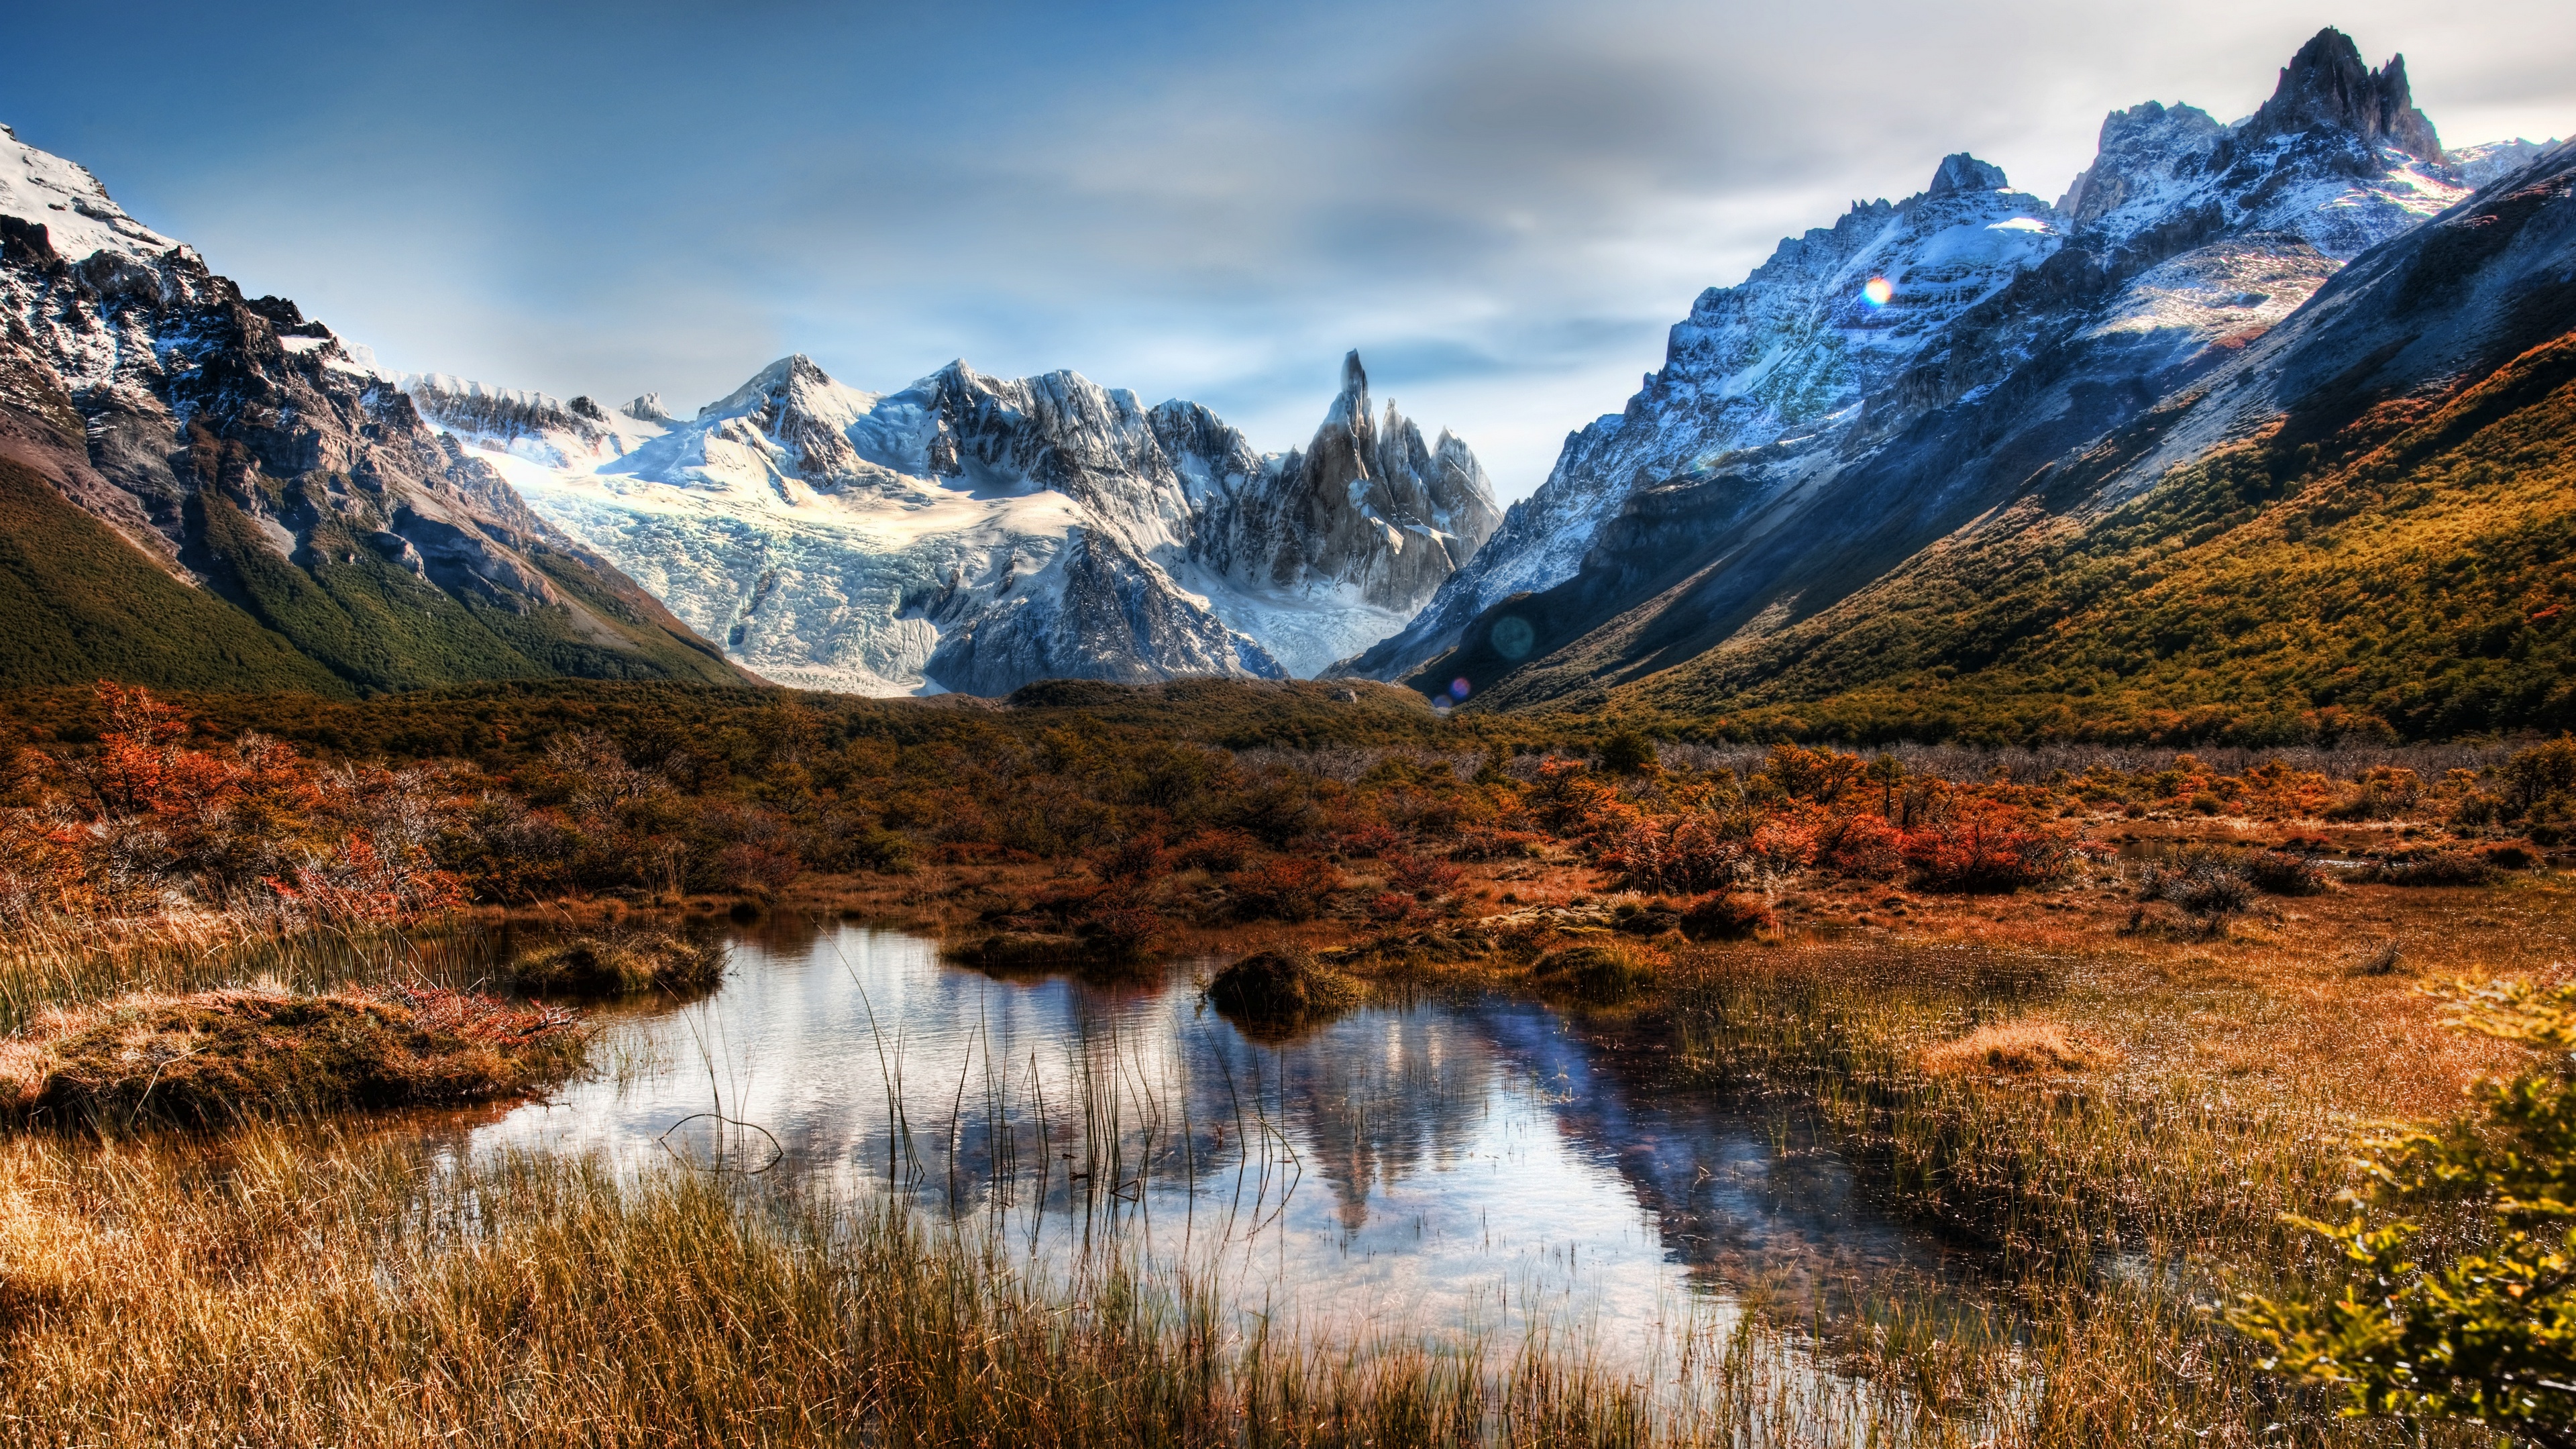 General 3840x2160 Trey Ratcliff photography mountains valley snow water reflection Argentina nature